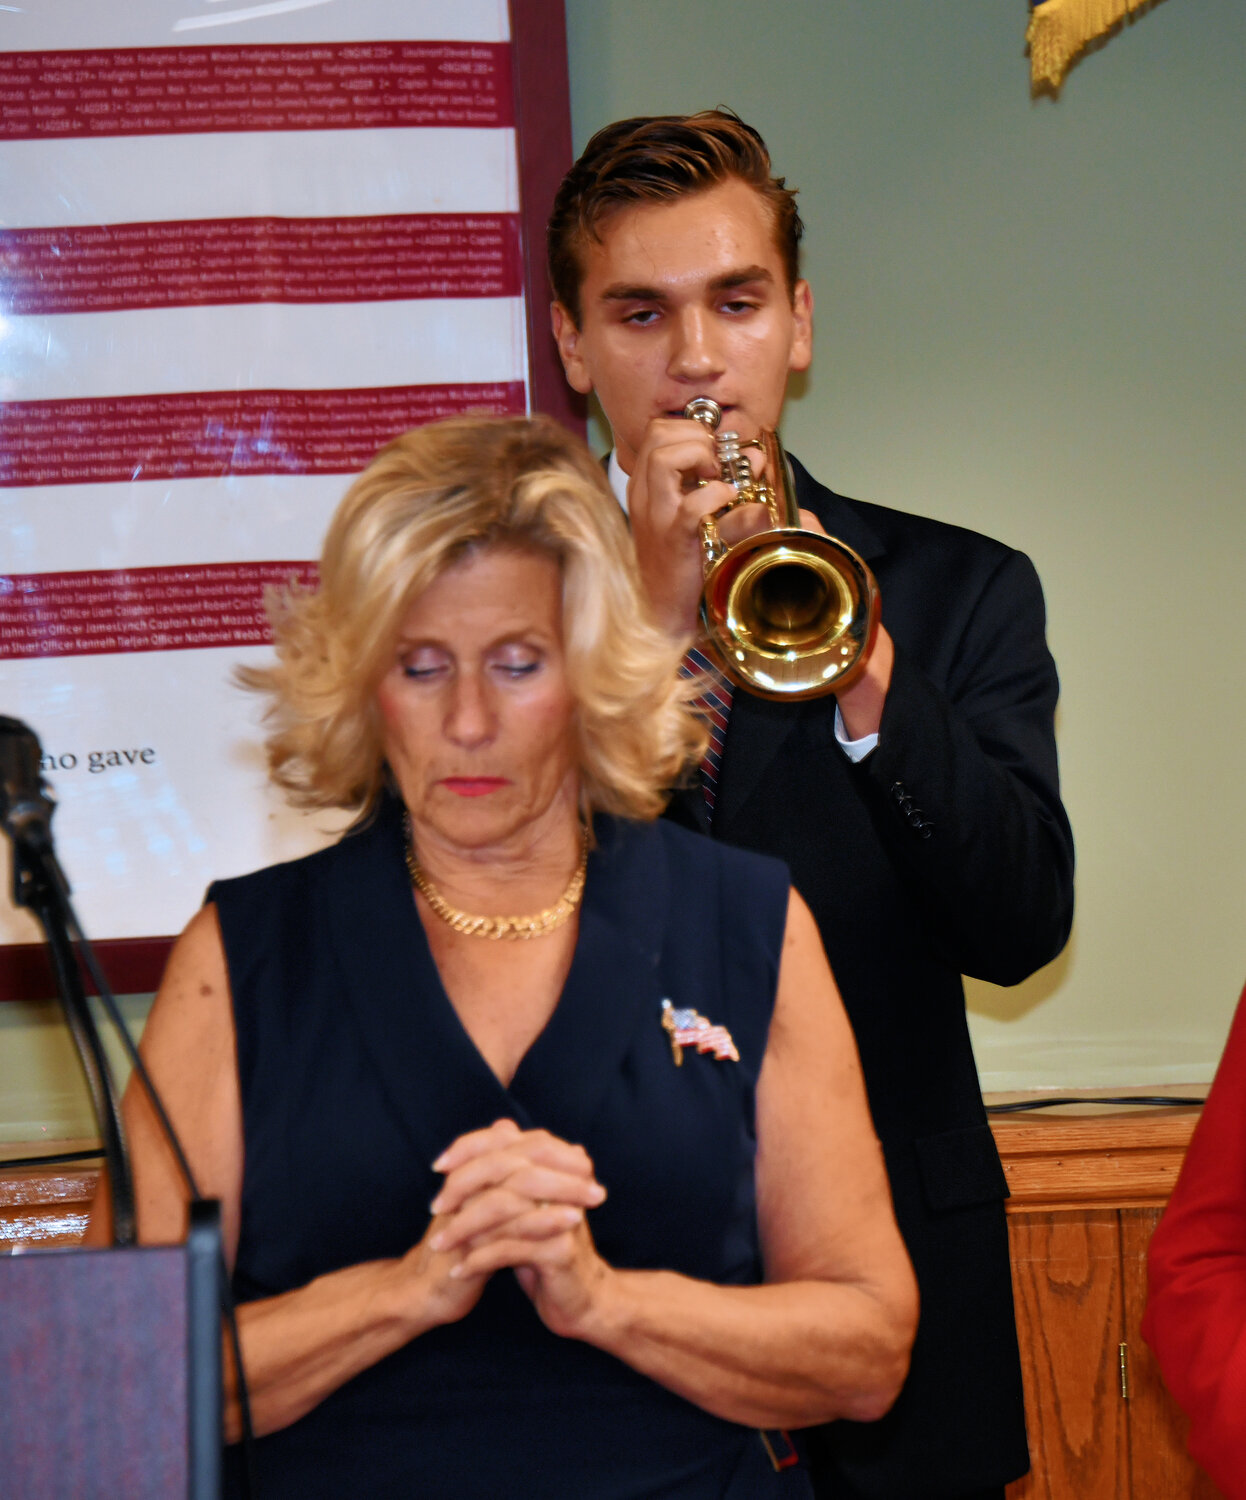 Mathew McCormack played taps, before Mayor Panzenbeck led the crowd in a moment of silence.